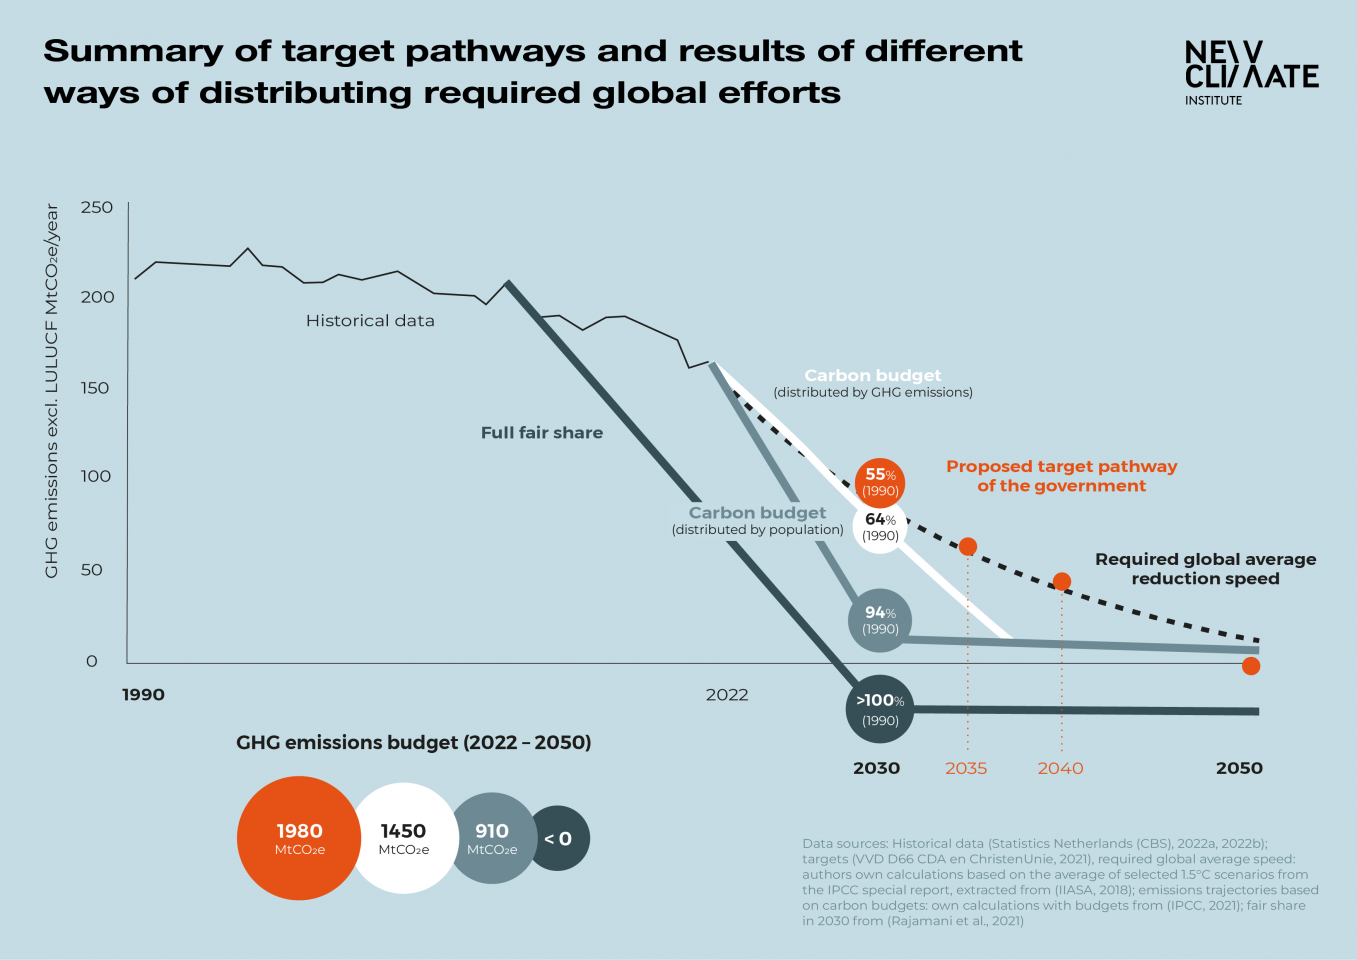 The graphic shows different GHG emissions pathways for the Netherlands up to 2050. All pathways that consider a fair contribution of the country to global efforts lead to faster and deeper reductions than the anticipated target pathway of the government